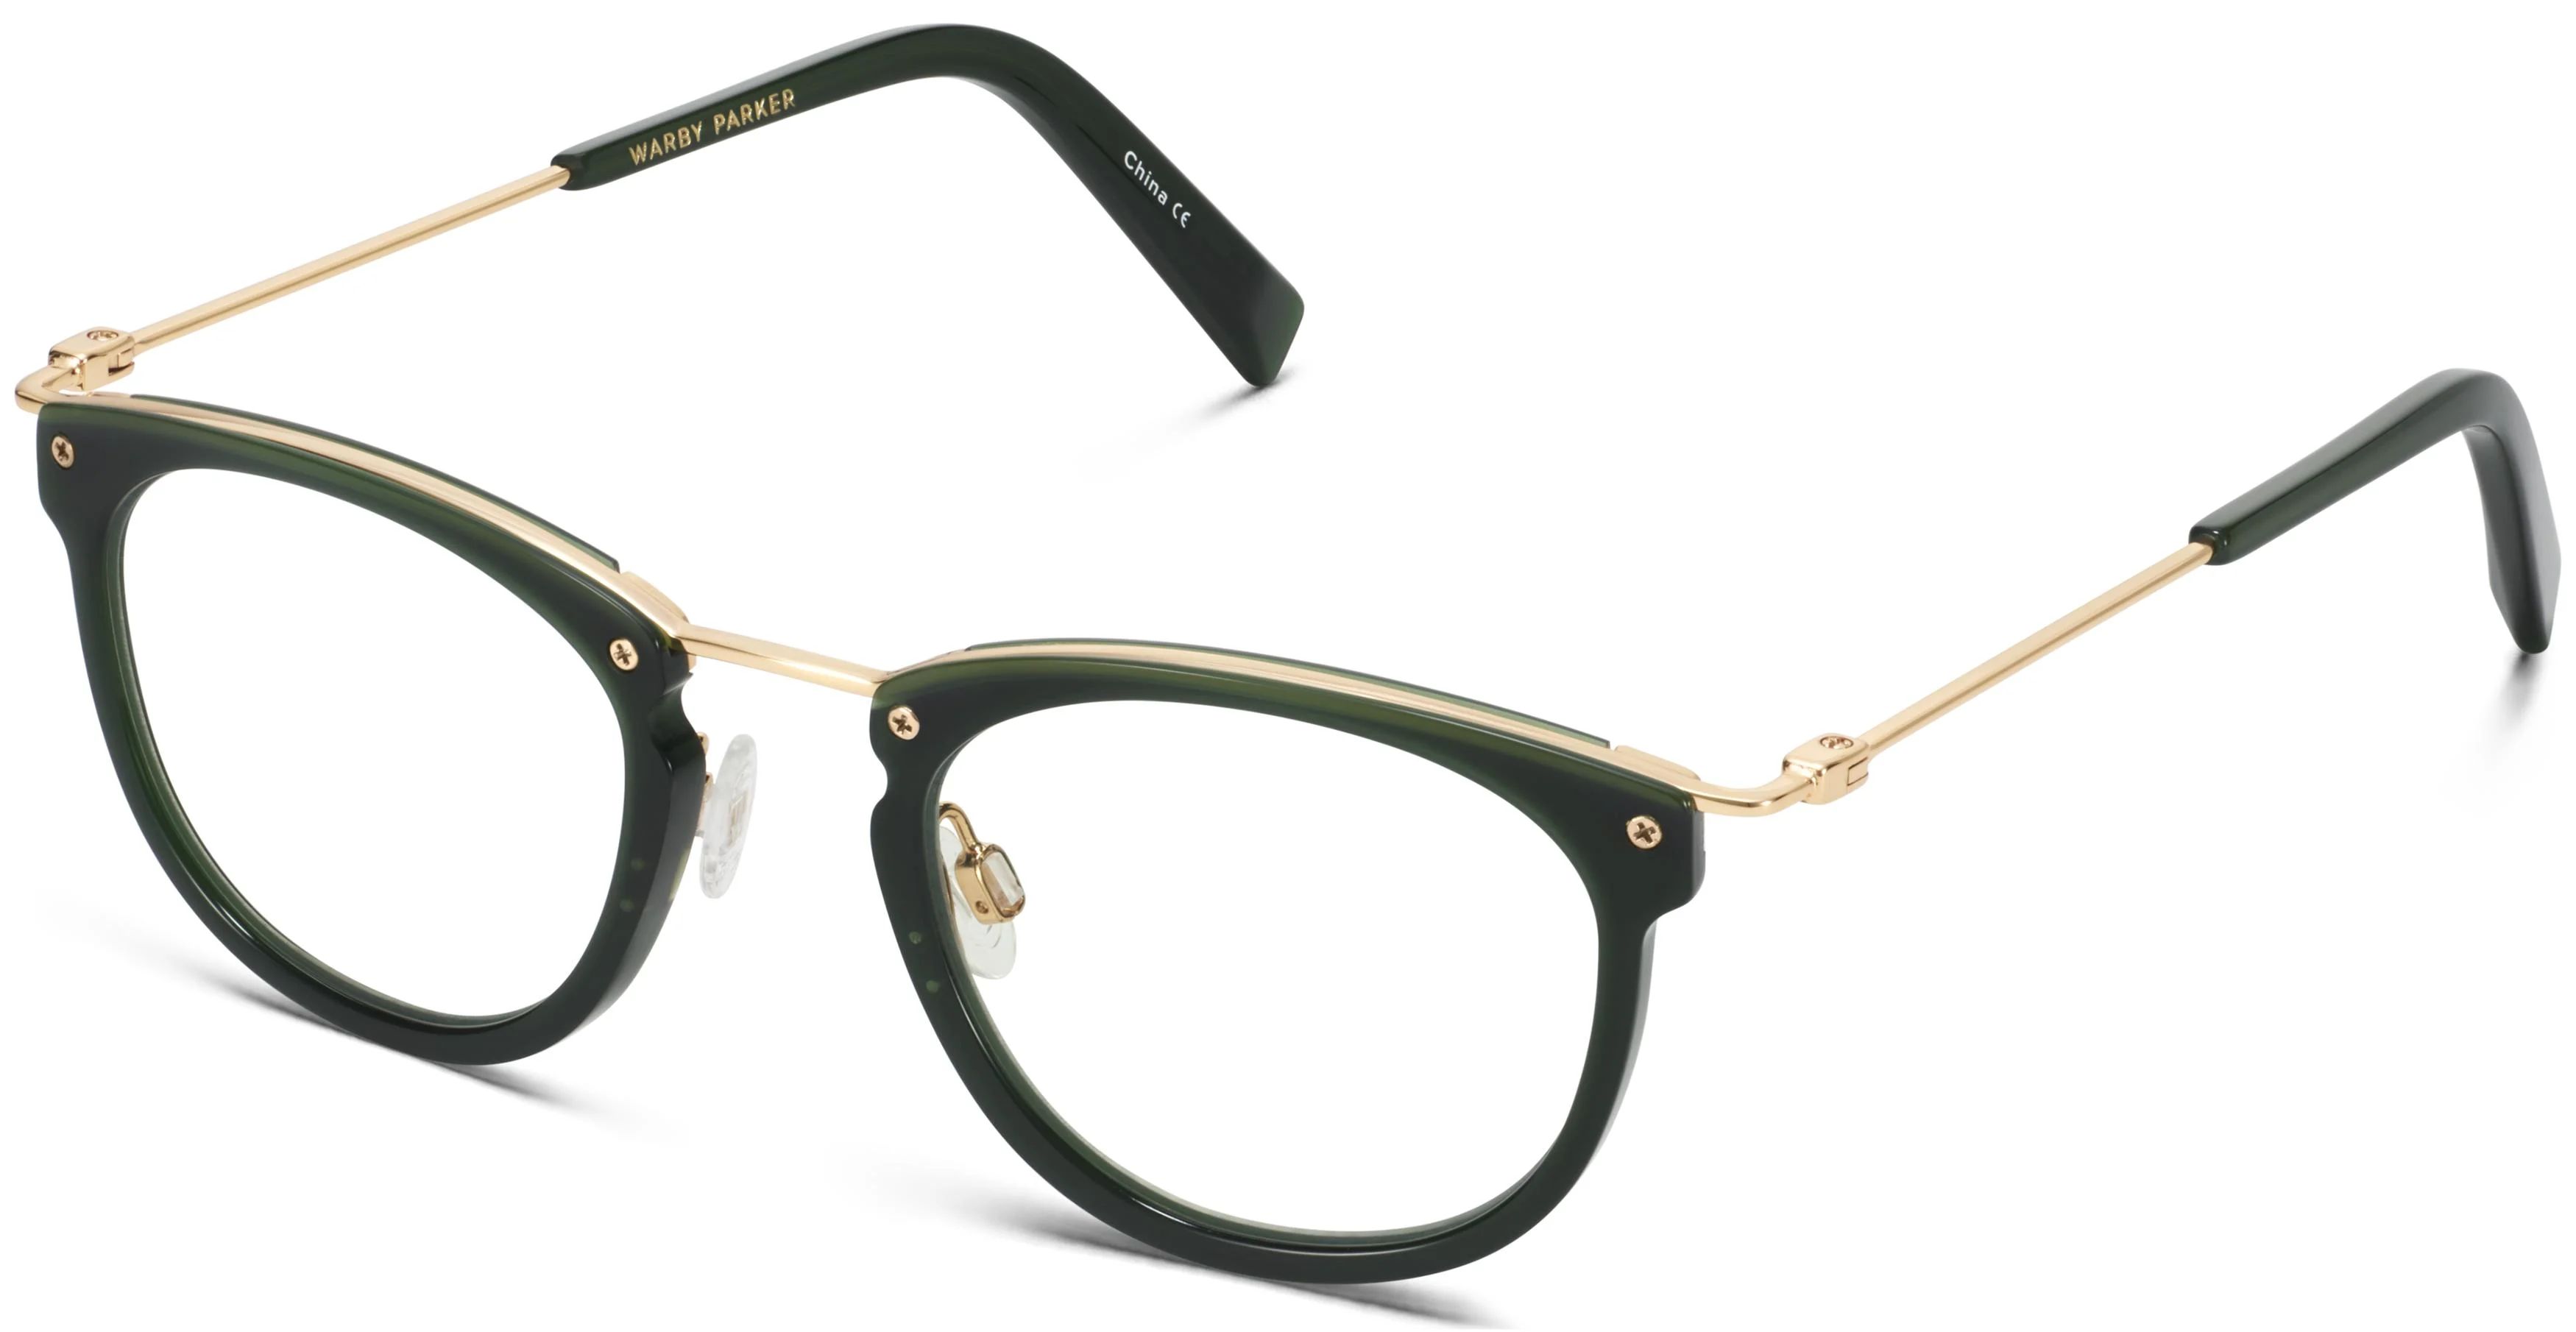 Moriarty | Warby Parker (US)